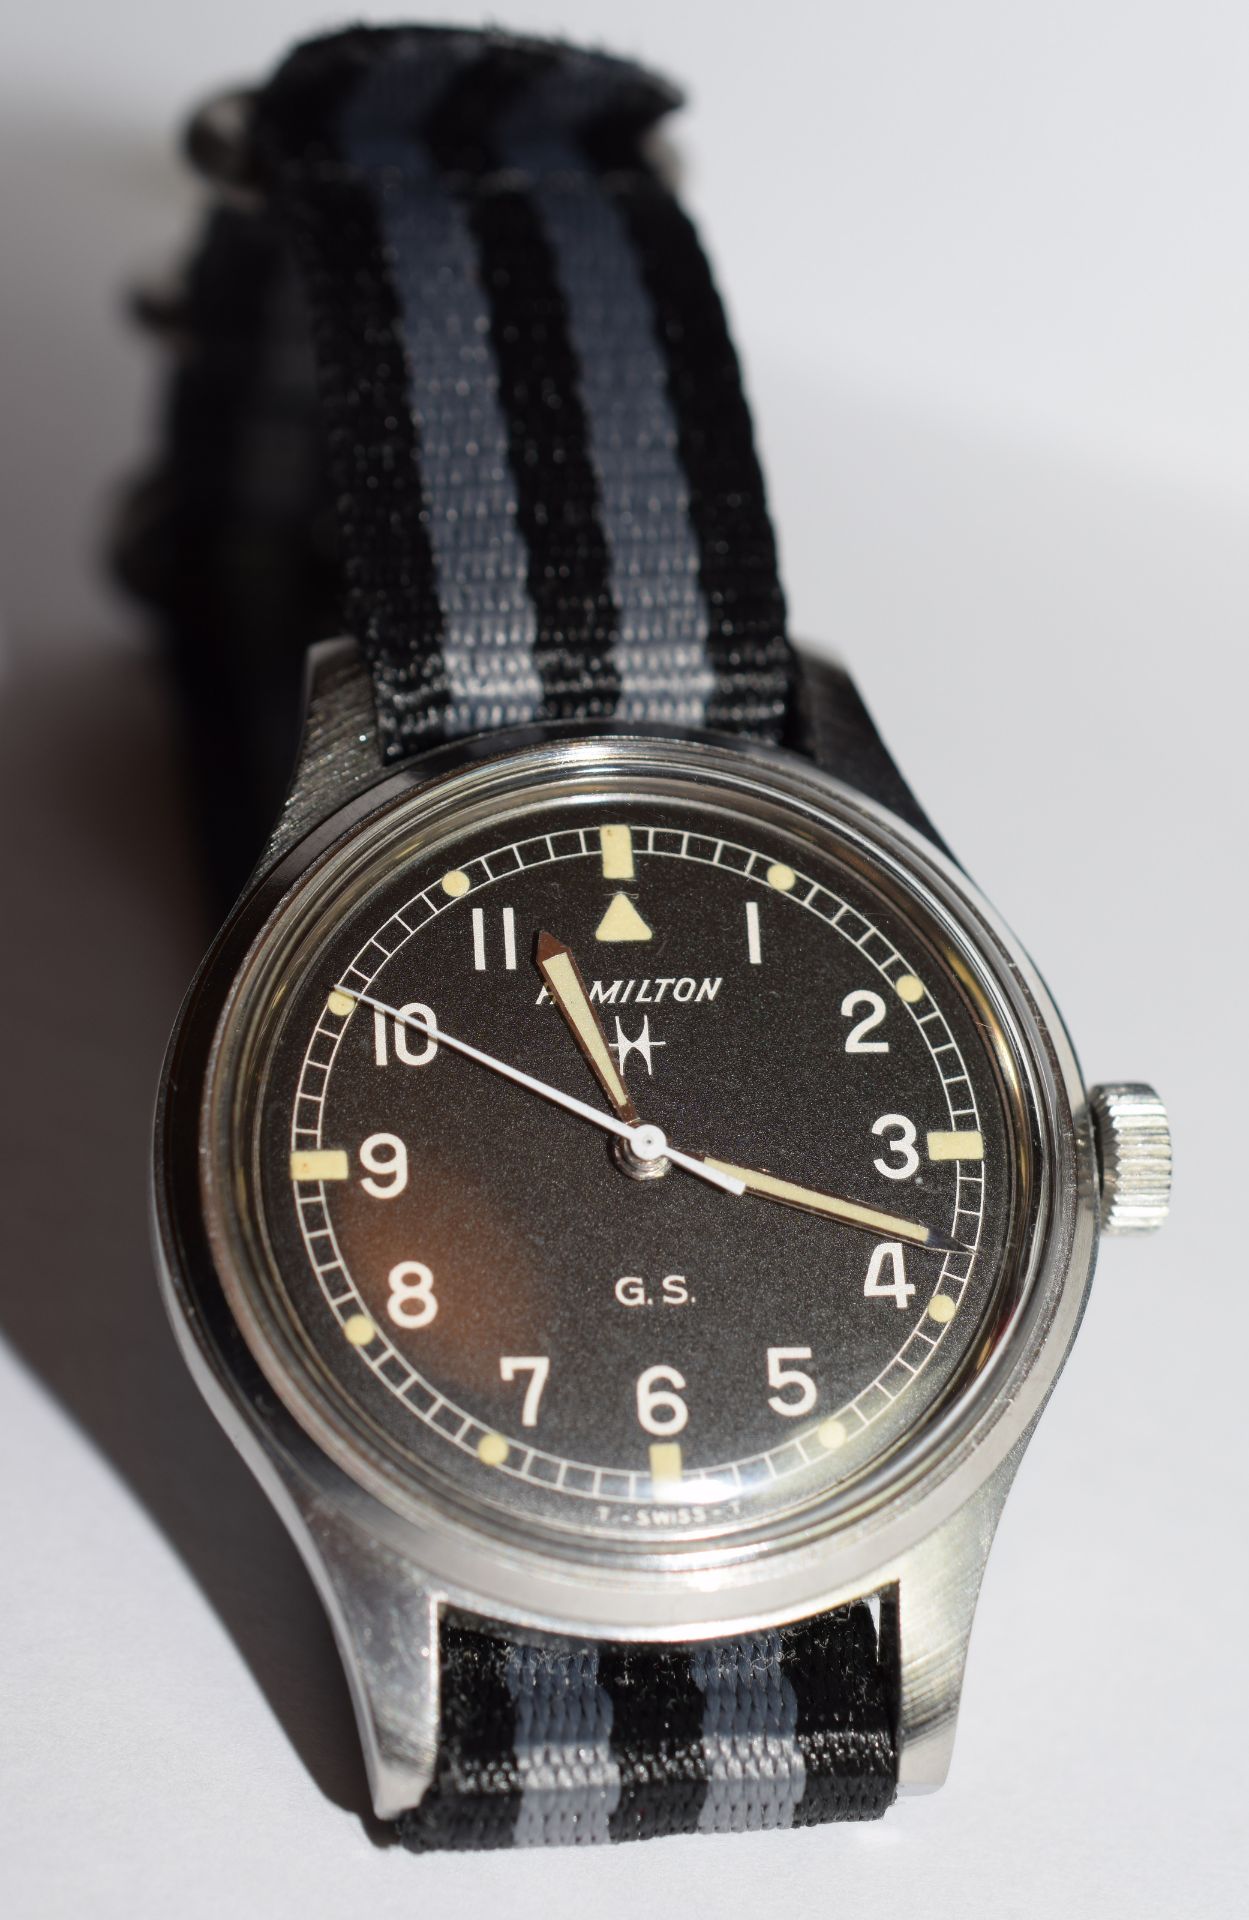 Hamilton GS Tropicalized (GS = General Services) Military Watch - Image 2 of 10